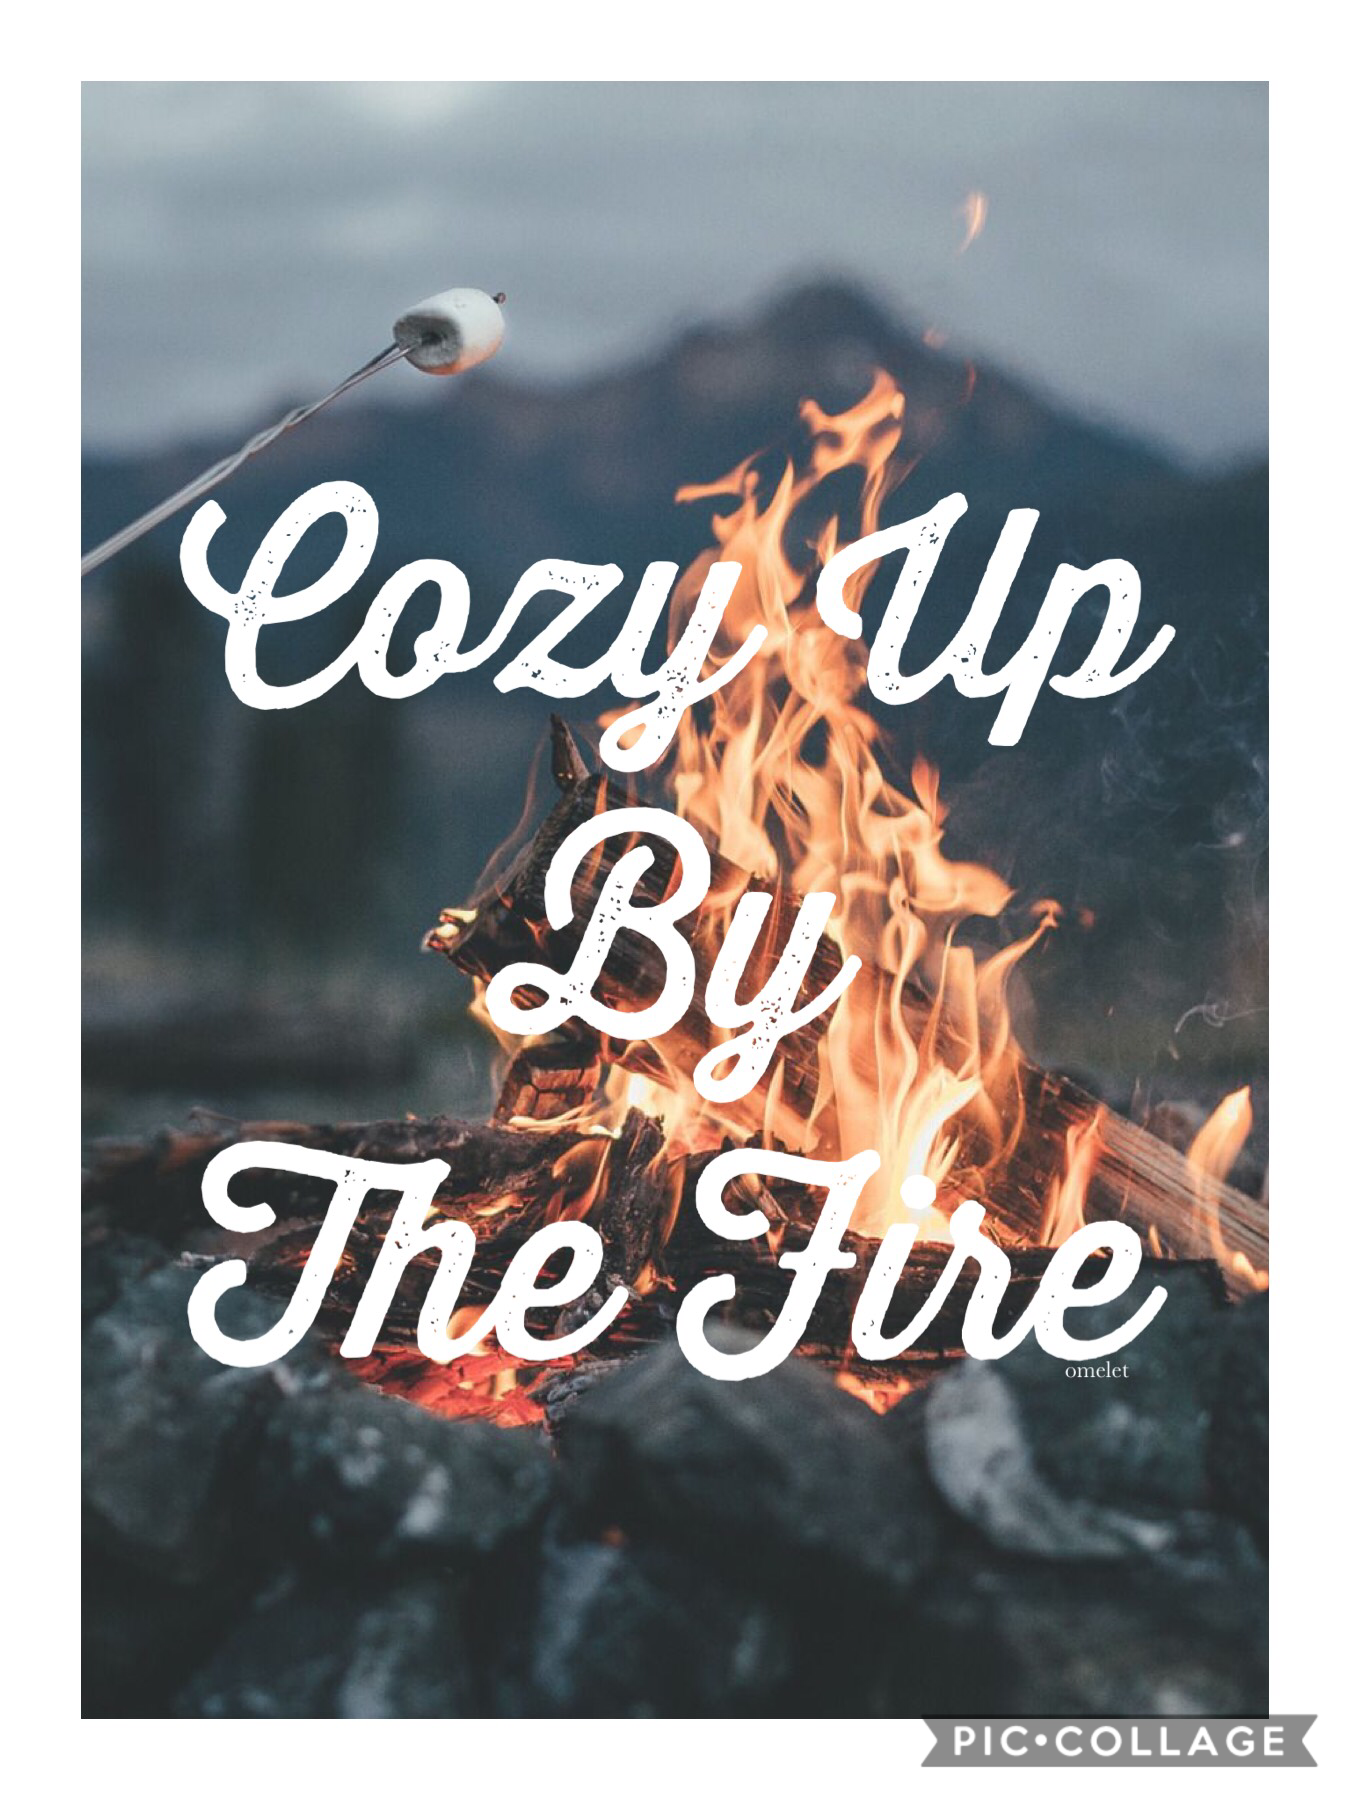 This chilly weather makes me wanna sit out by the fire [Click Here]

Even though I literally have no followers right now, I’m thinking of doing a question of the day kind of thing on each post. I think it’d be a fun way to get to know people. I’ll start t